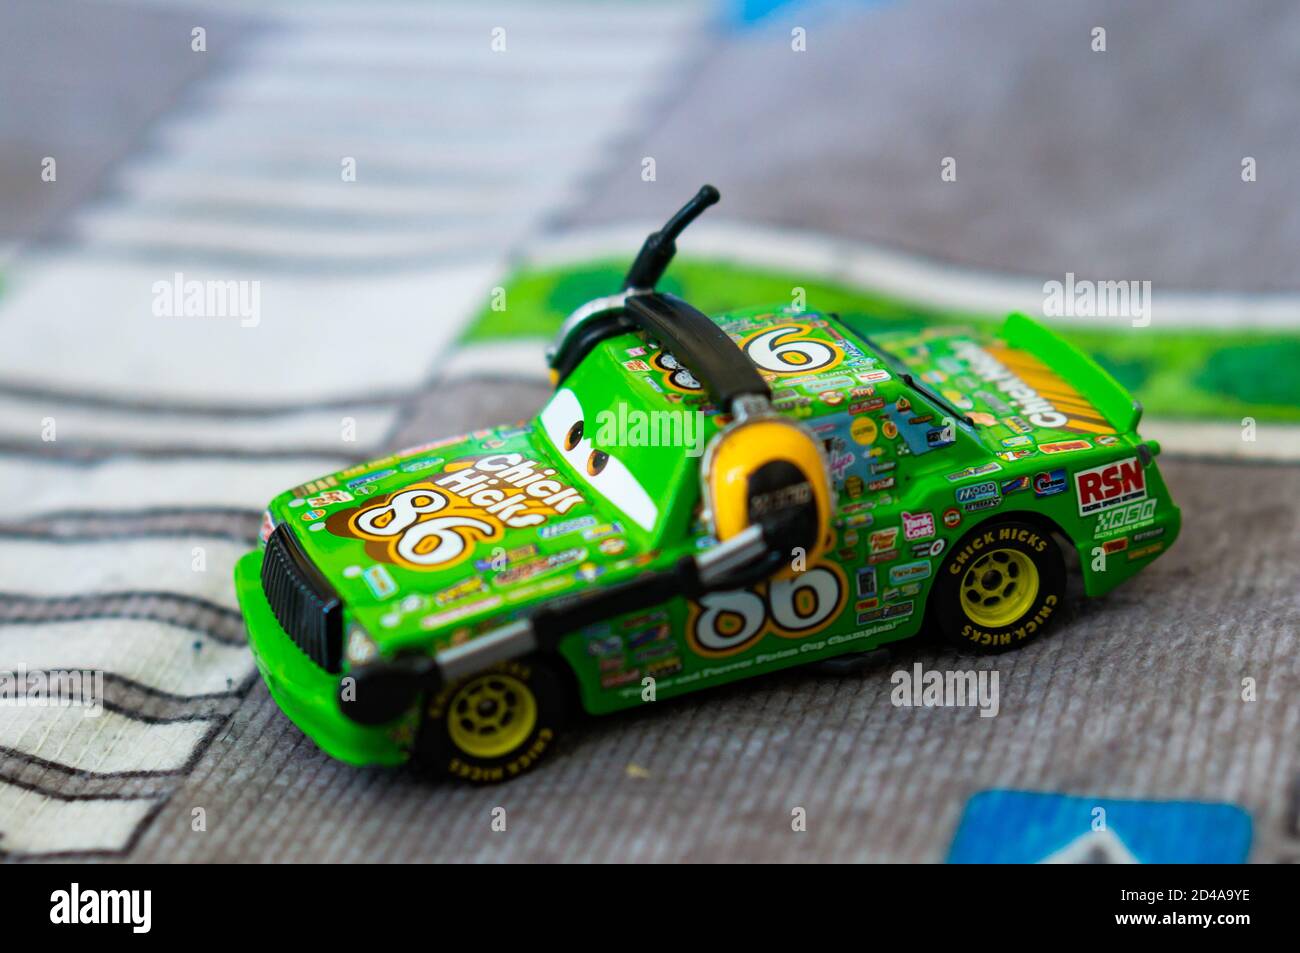 POZNAN, POLAND - Oct 03, 2020: Green Disney Pixar Mattel Chick Hicks toy model car with number 86 wearing headphones with microphone on a play road ma Stock Photo